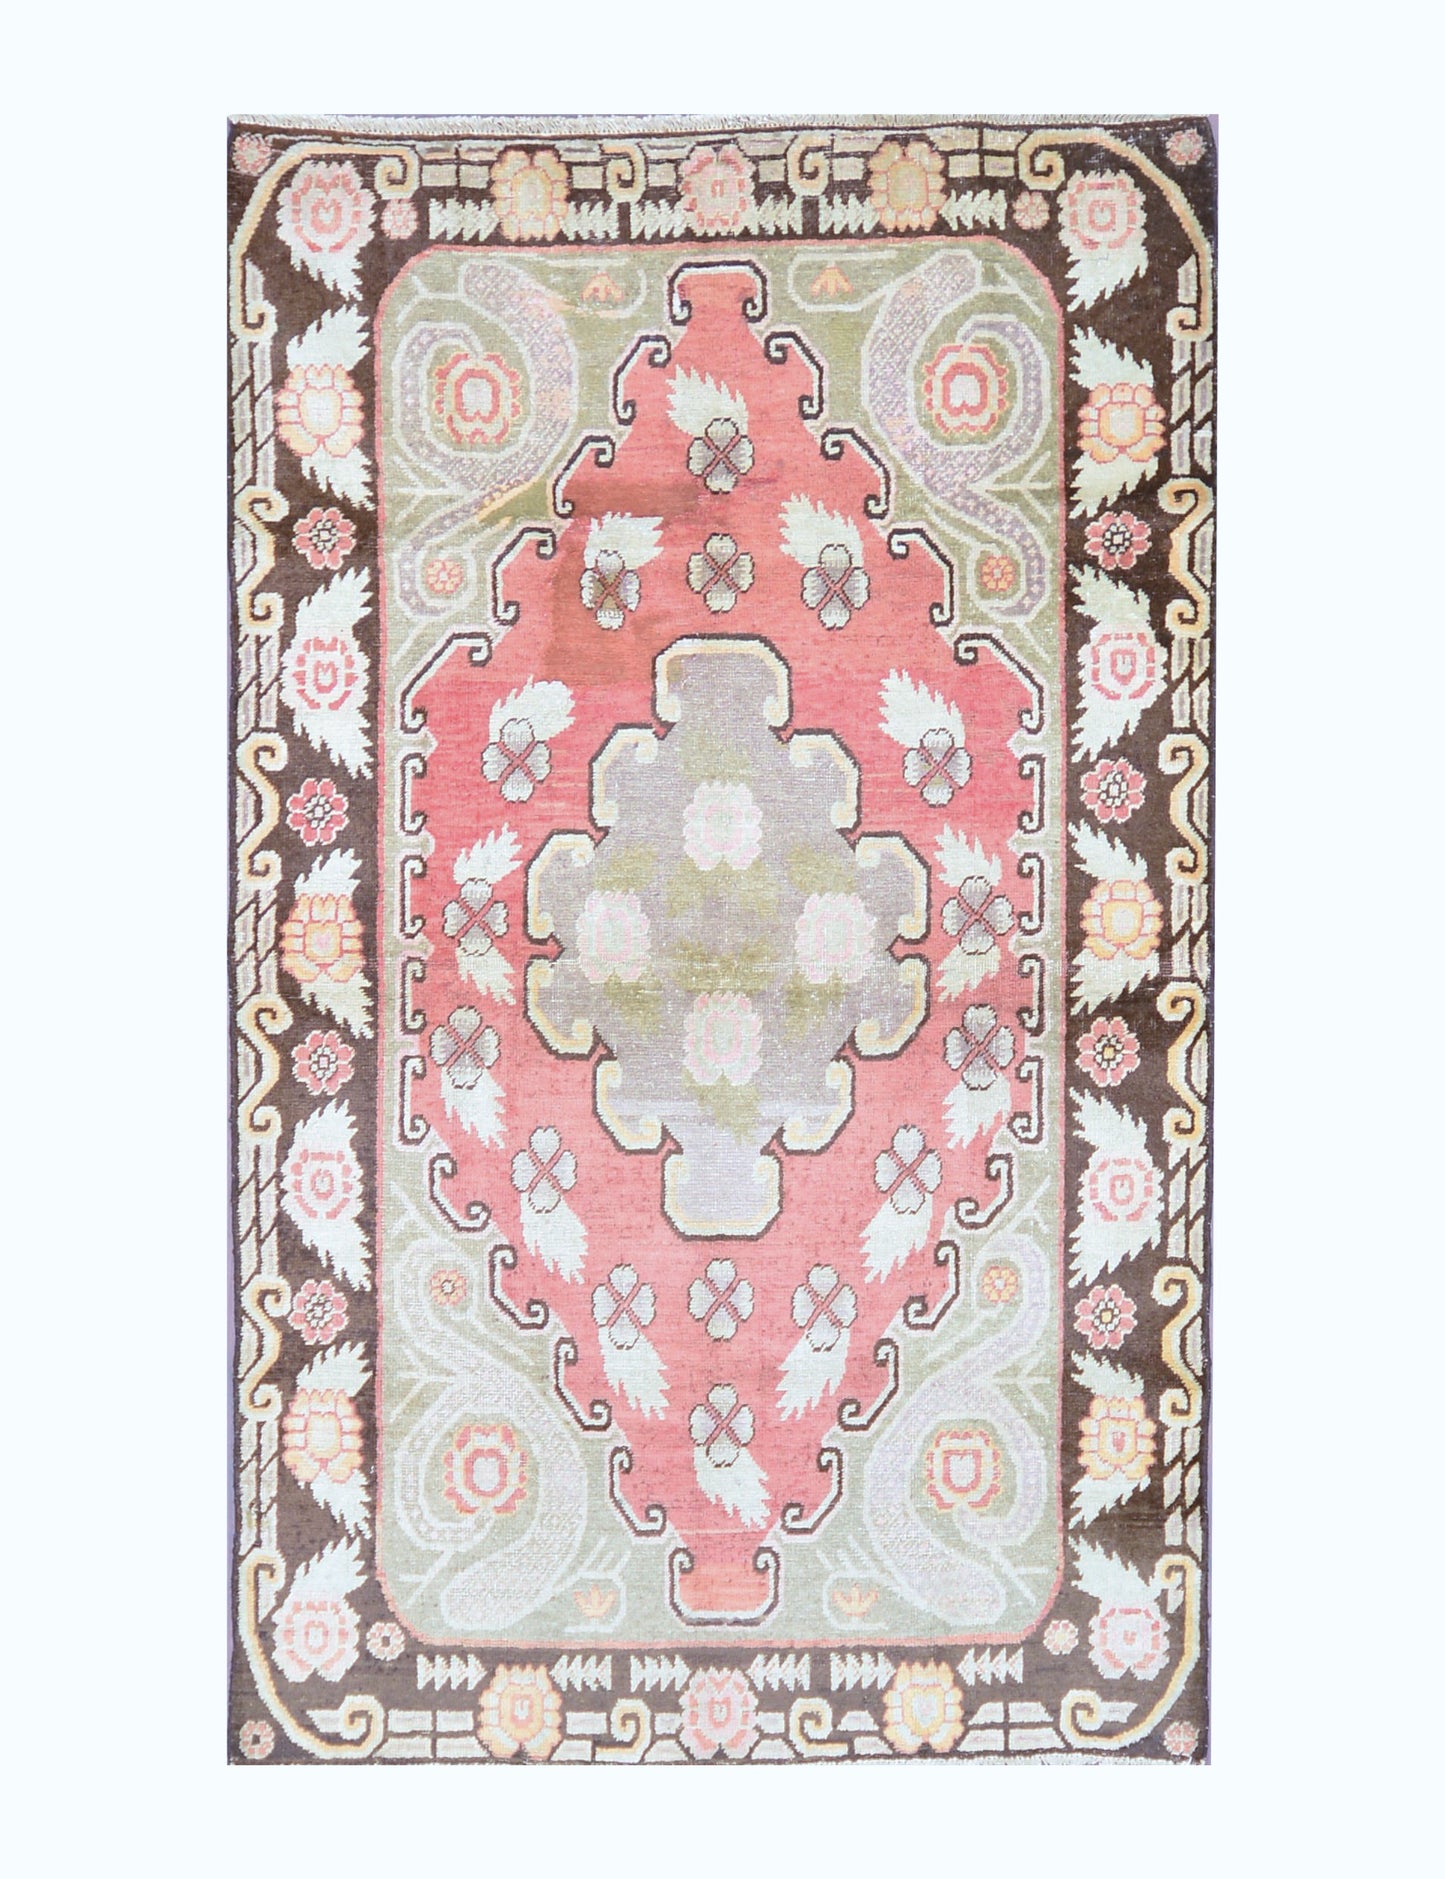 Get trendy with Orange Brown Antique Khotan Handknotted Rug 4.7x7.7ft 138x230cms - Tribal Rugs available at Jaipur Oriental Rugs. Grab yours for $1911.25 today!